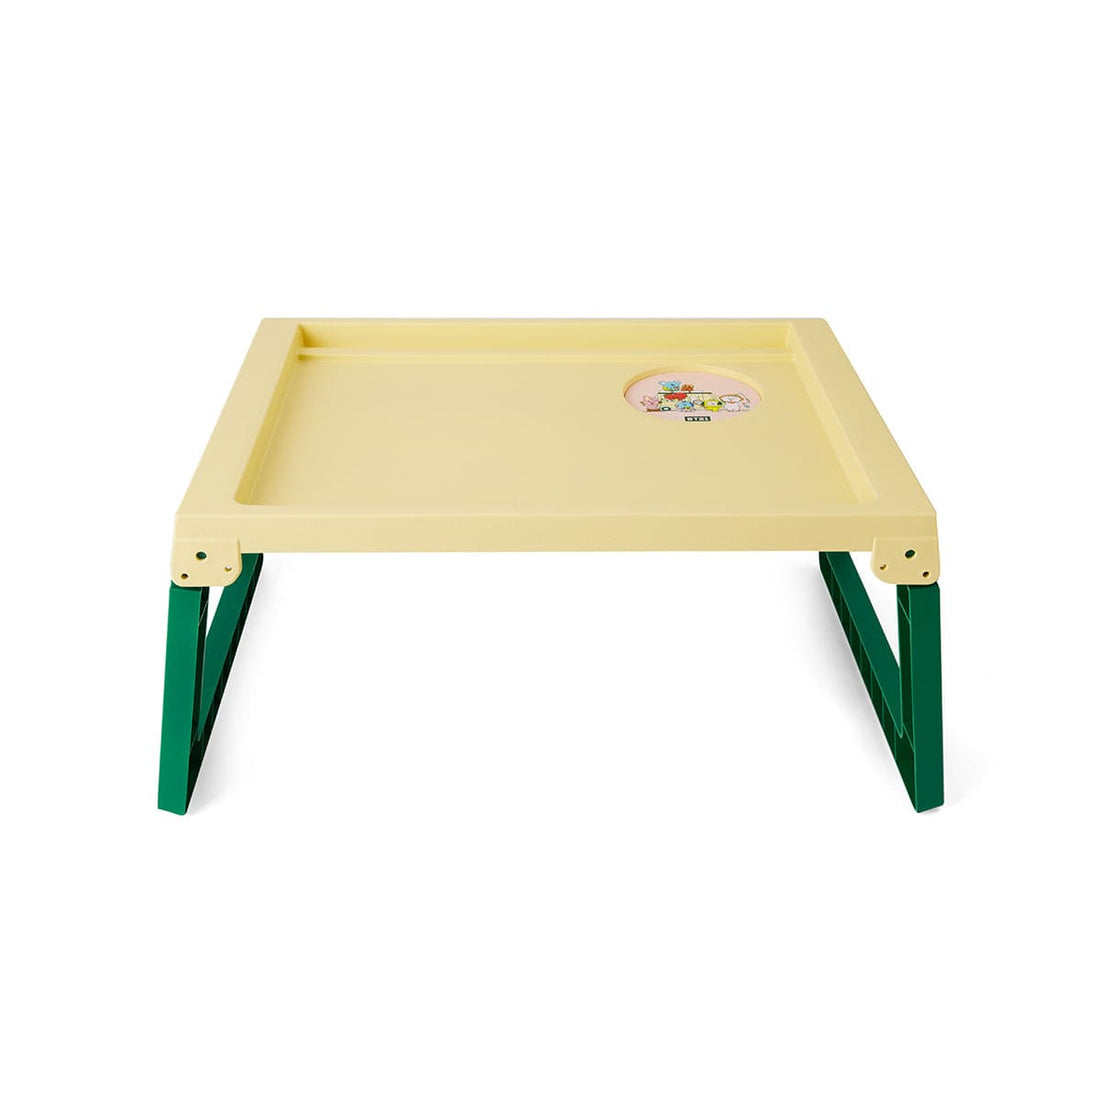 LINE FRIENDS HOUSEHOLD FOLDABLE TABLE BT21 PICNIC FOLDABLE TABLE